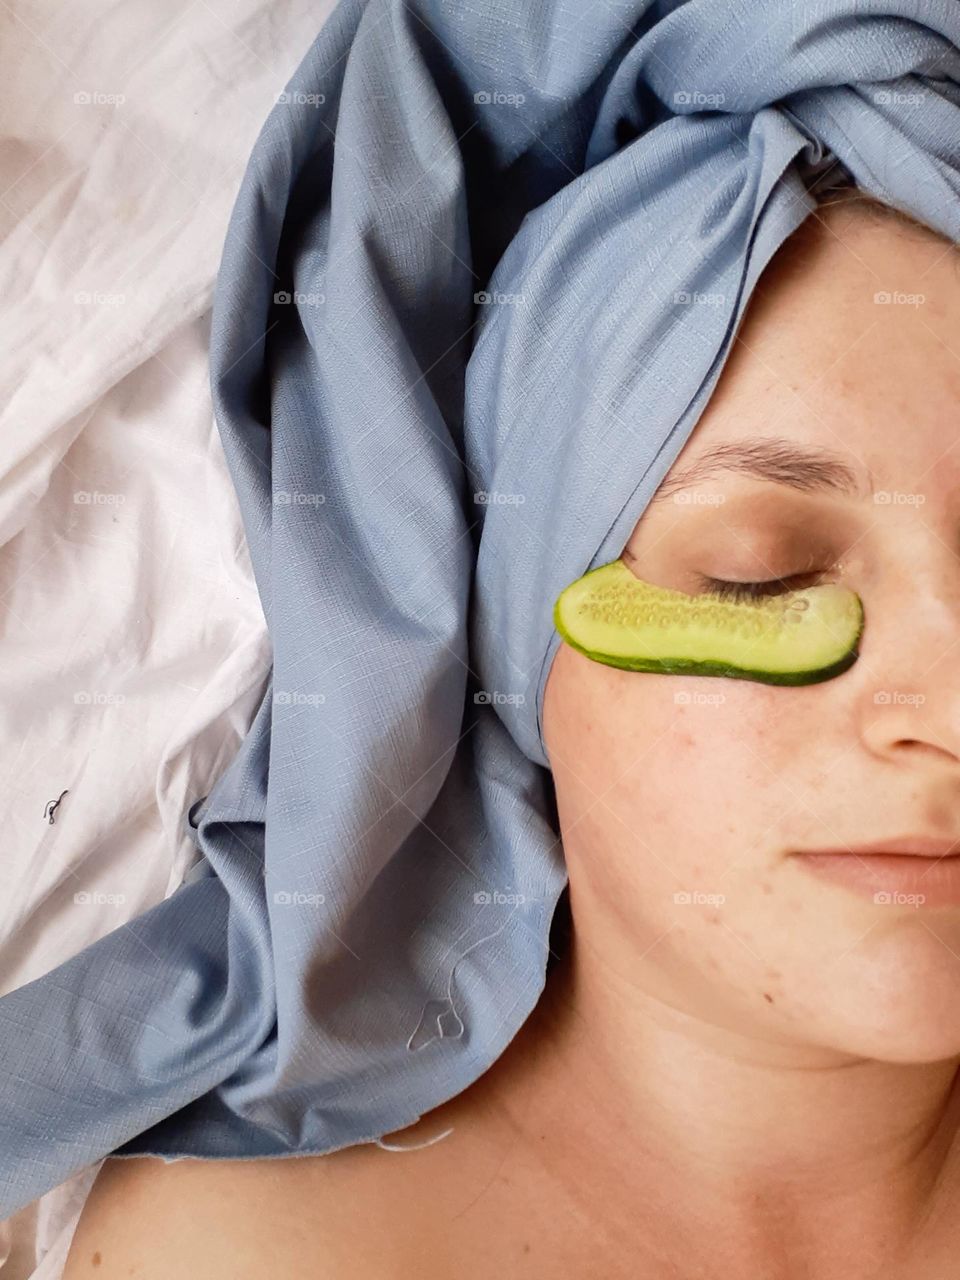 A pale female face during home cosmetic procedures, namely a cucumber mask